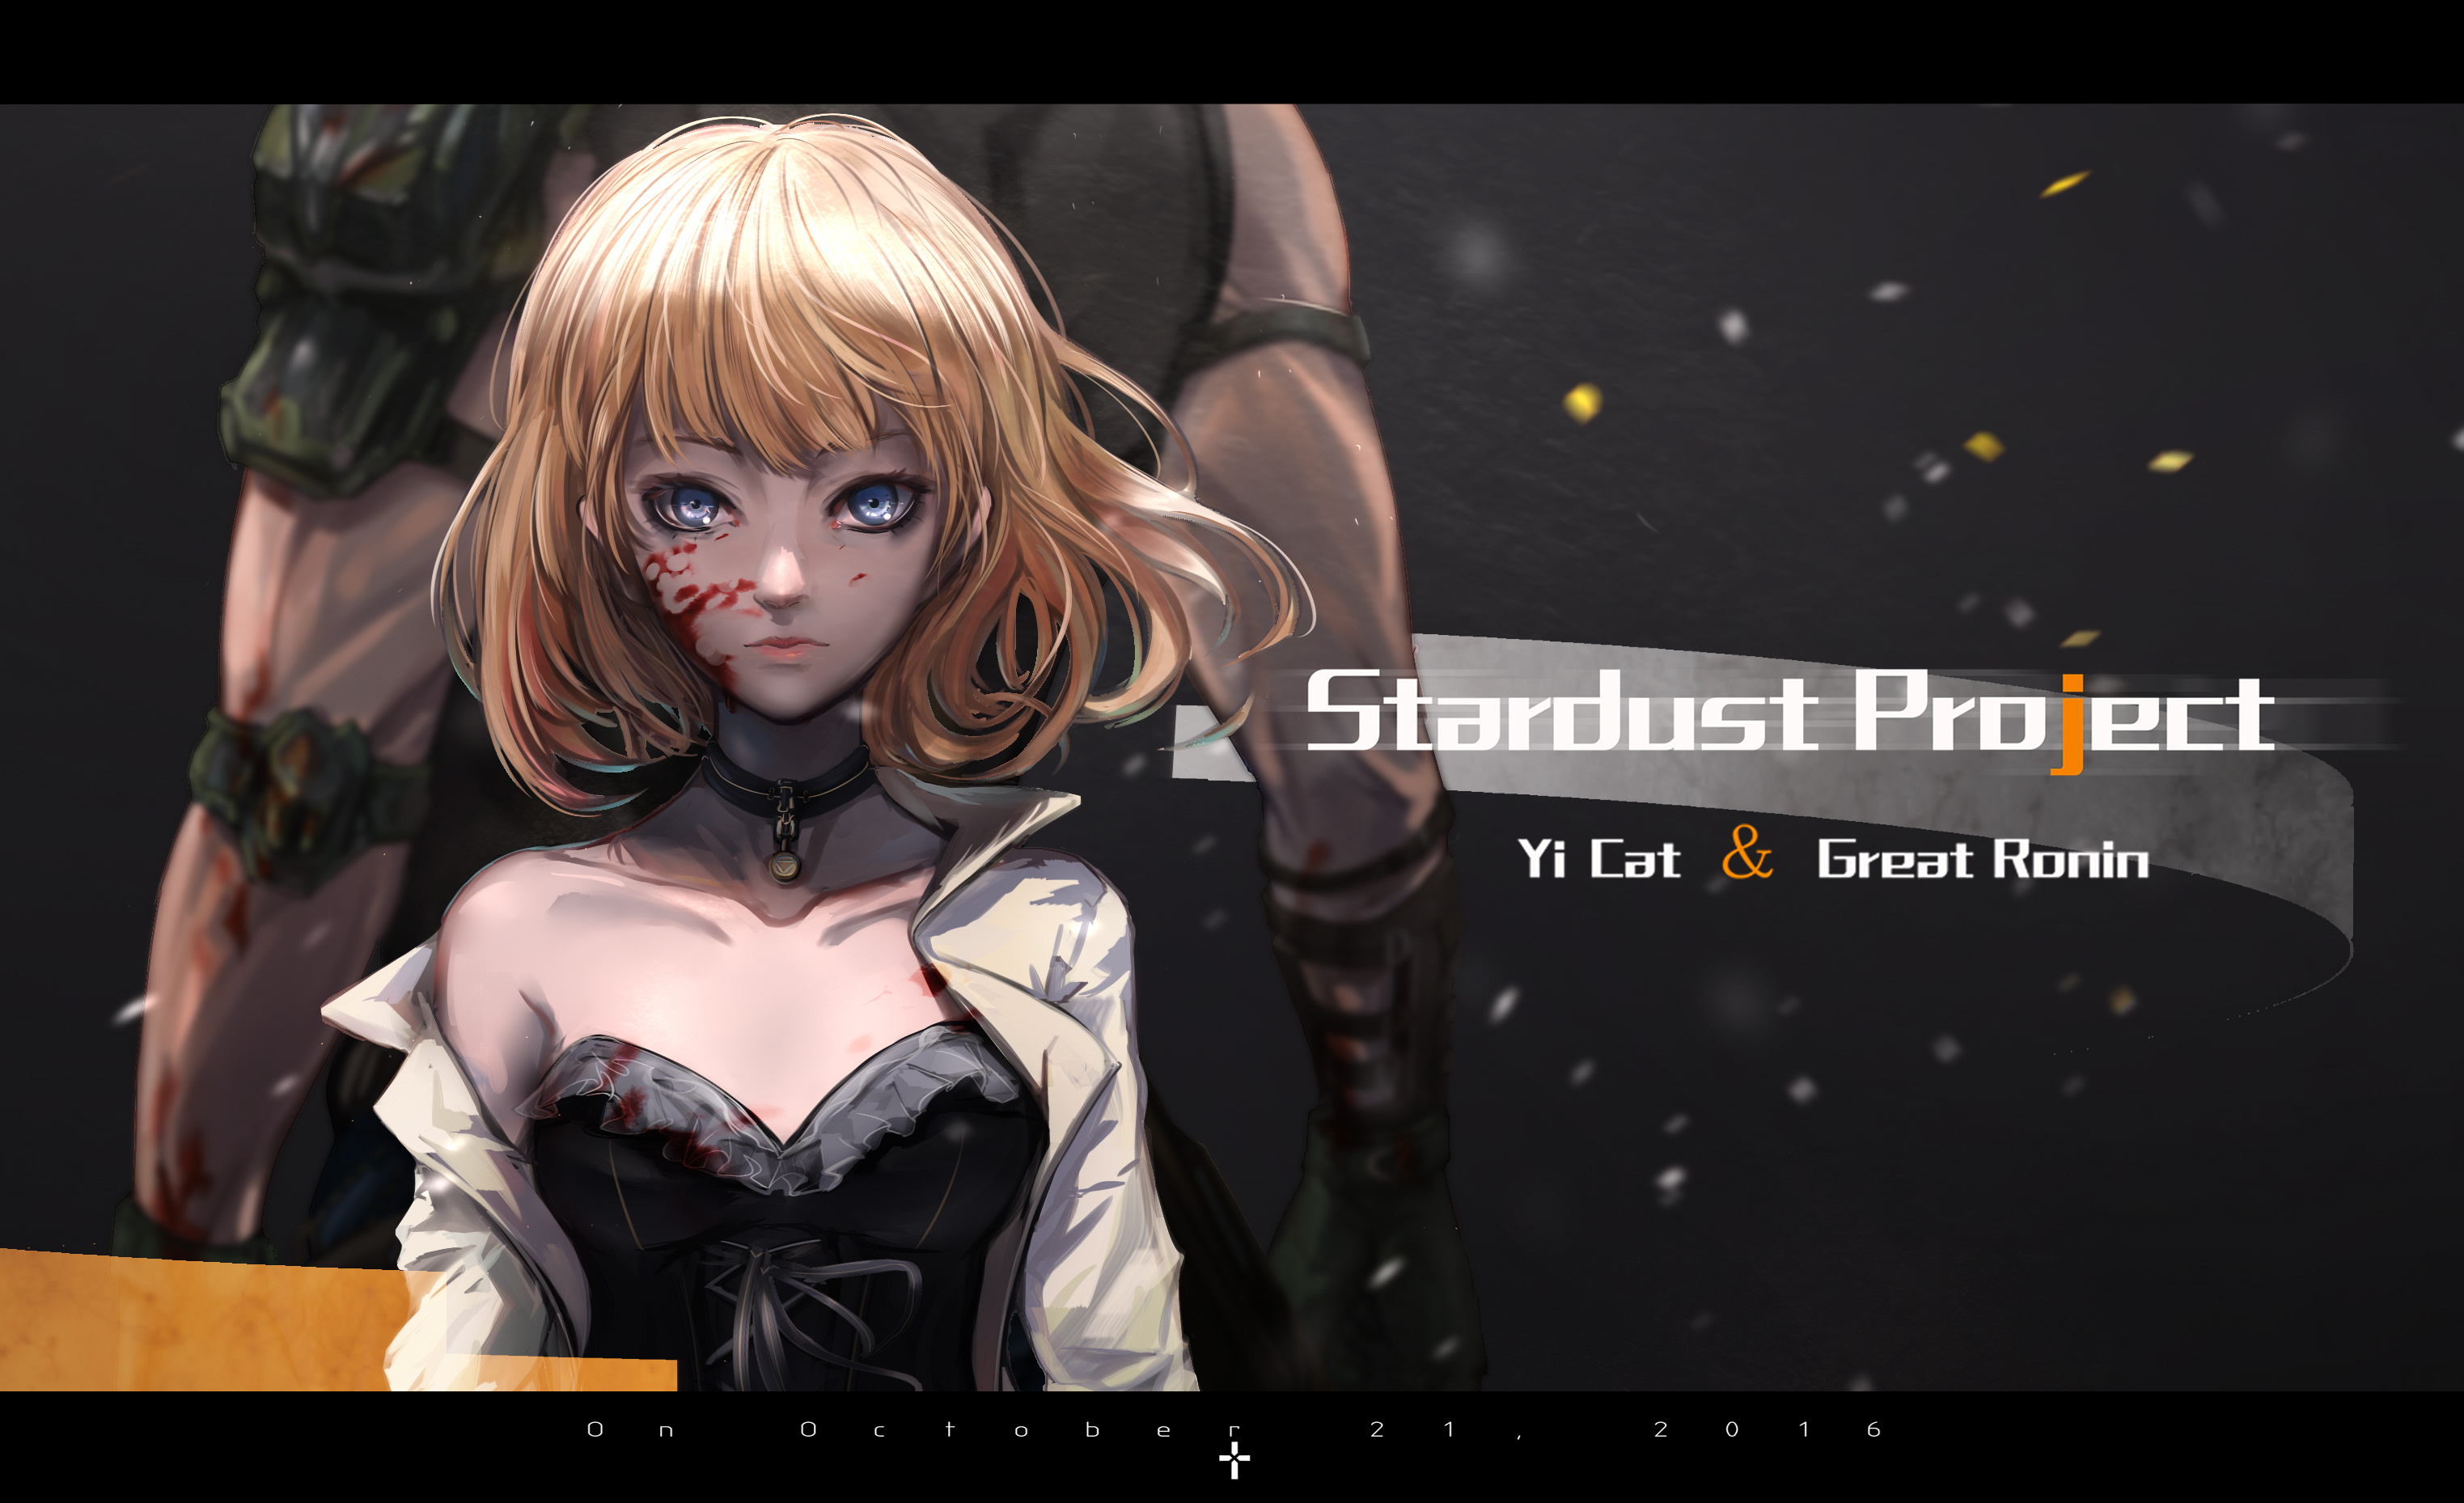 Stardust Project